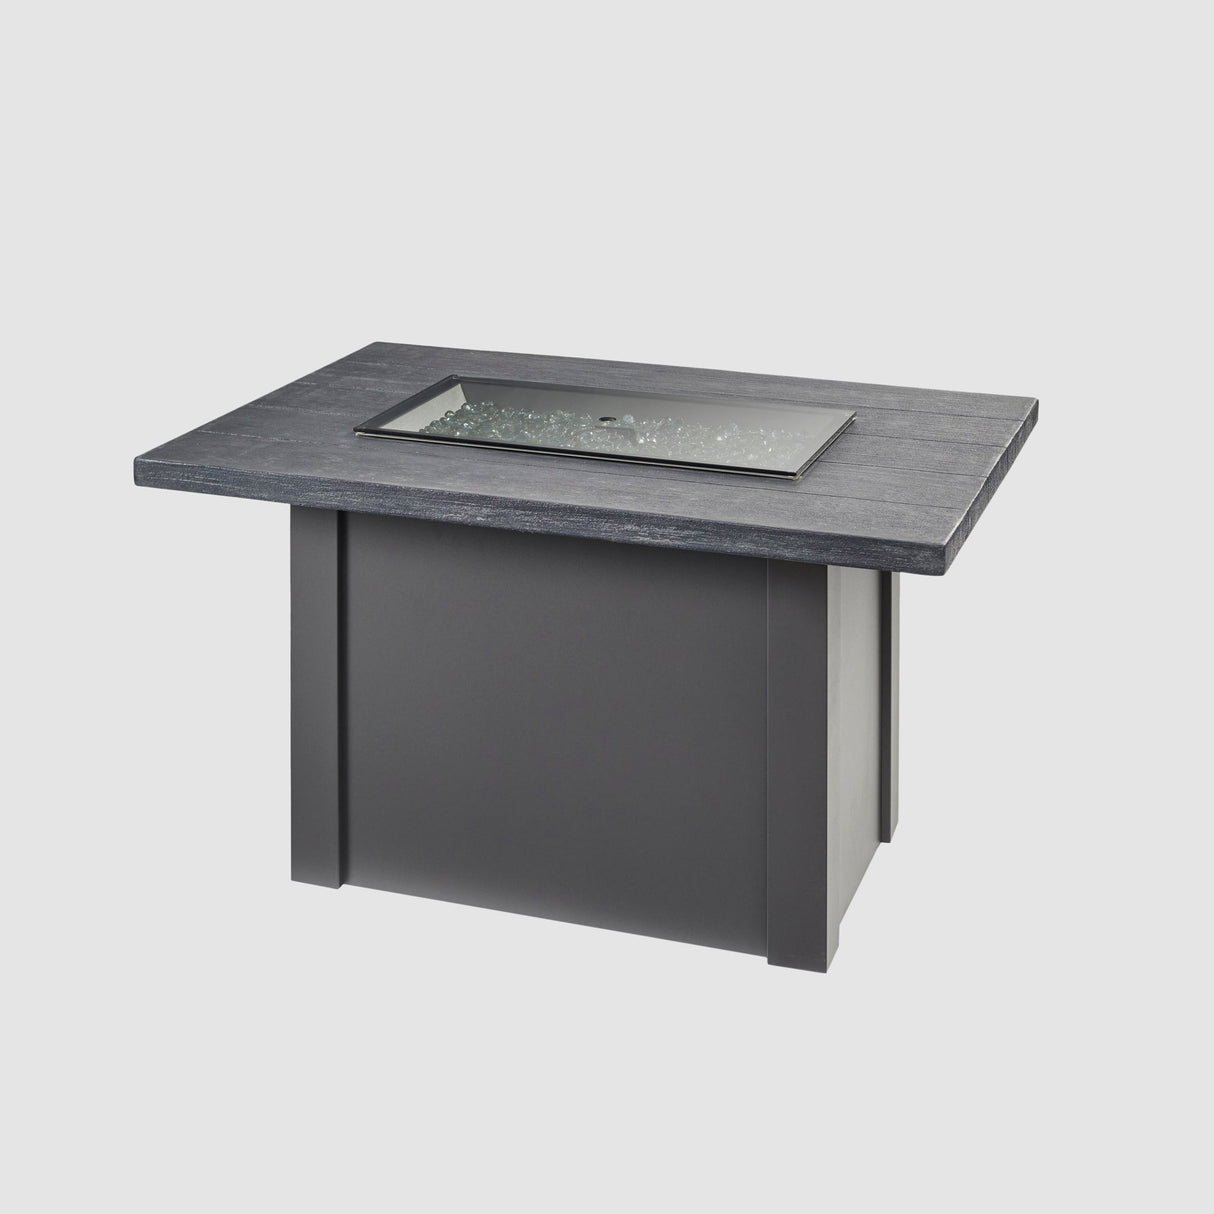 A grey glass burner cover on top of the Havenwood Rectangular Gas Fire Pit Table with a Carbon Grey top and Graphite Grey base